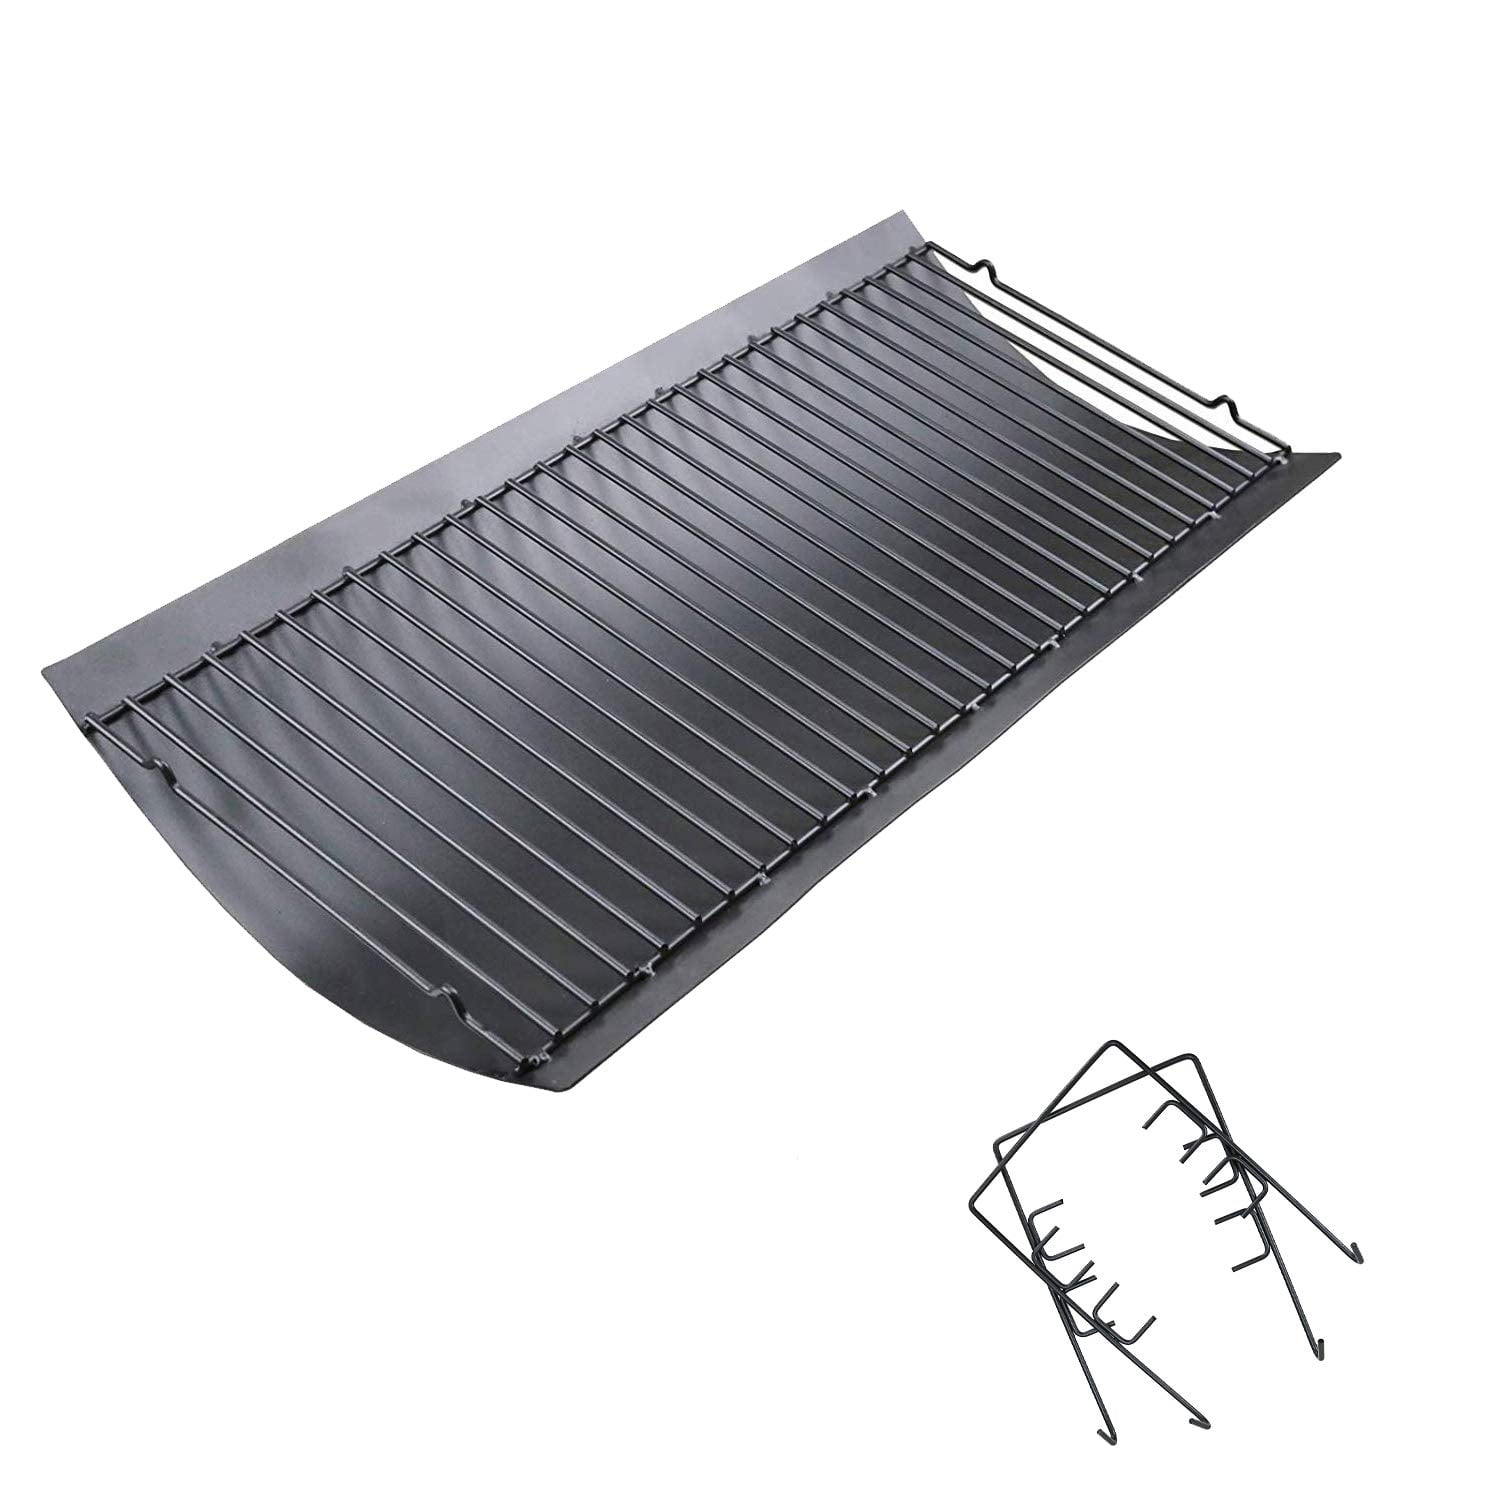 Hisencn 20 inch Ash Pan/Drip Pan for Chargriller 5050 Charcoal Replacement Parts with 2pcs Fire Grate - Walmart.com